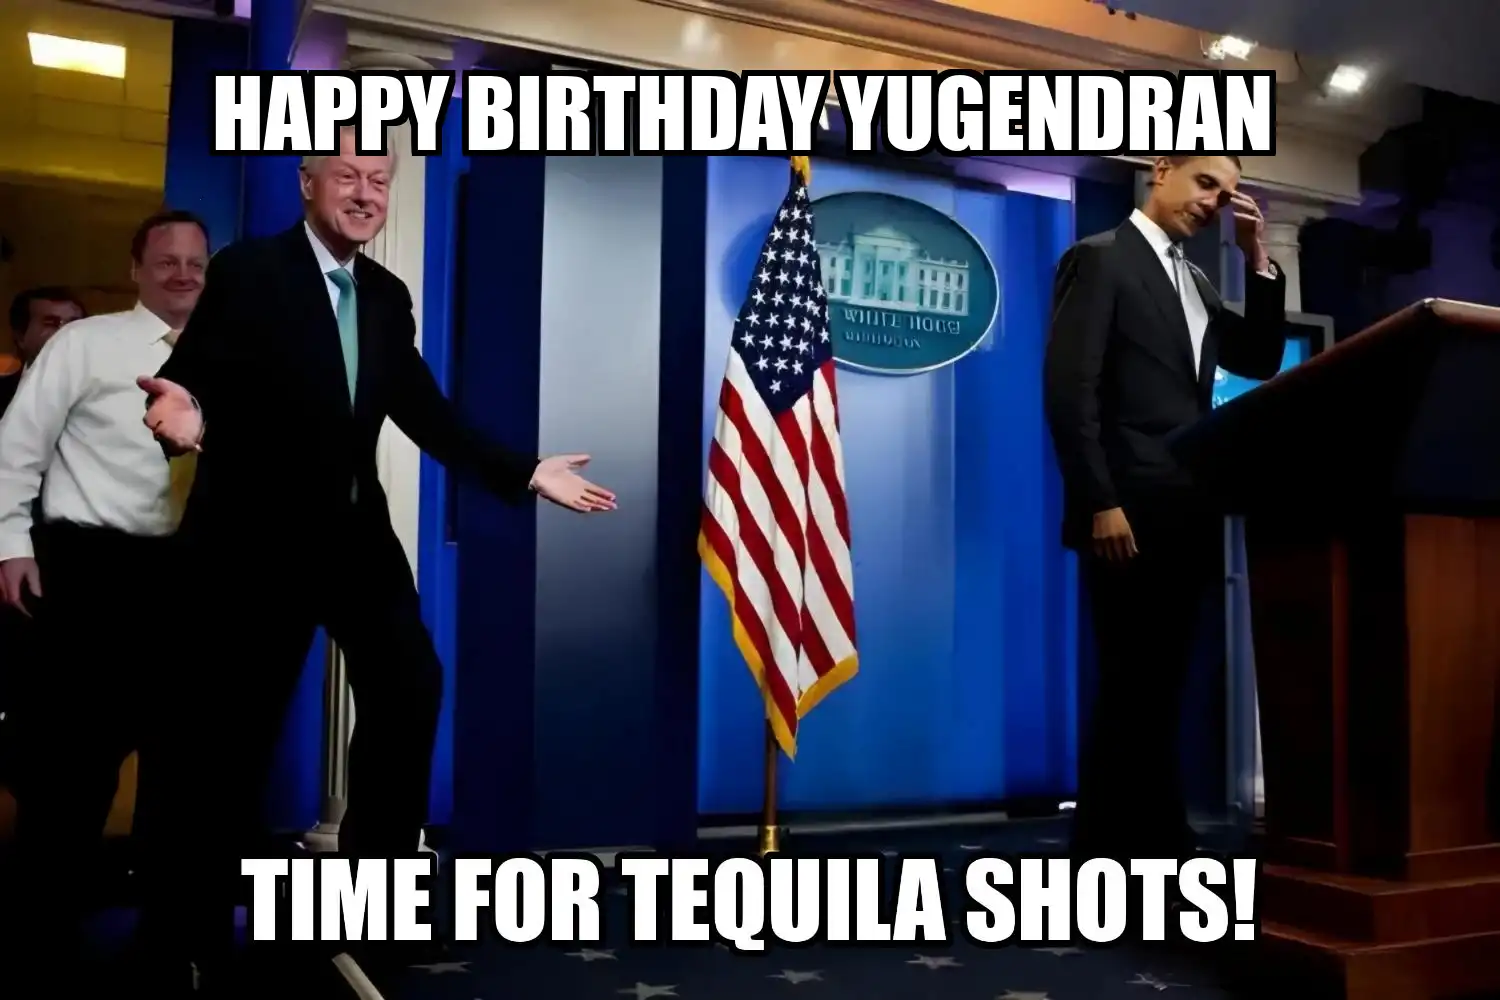 Happy Birthday Yugendran Time For Tequila Shots Memes